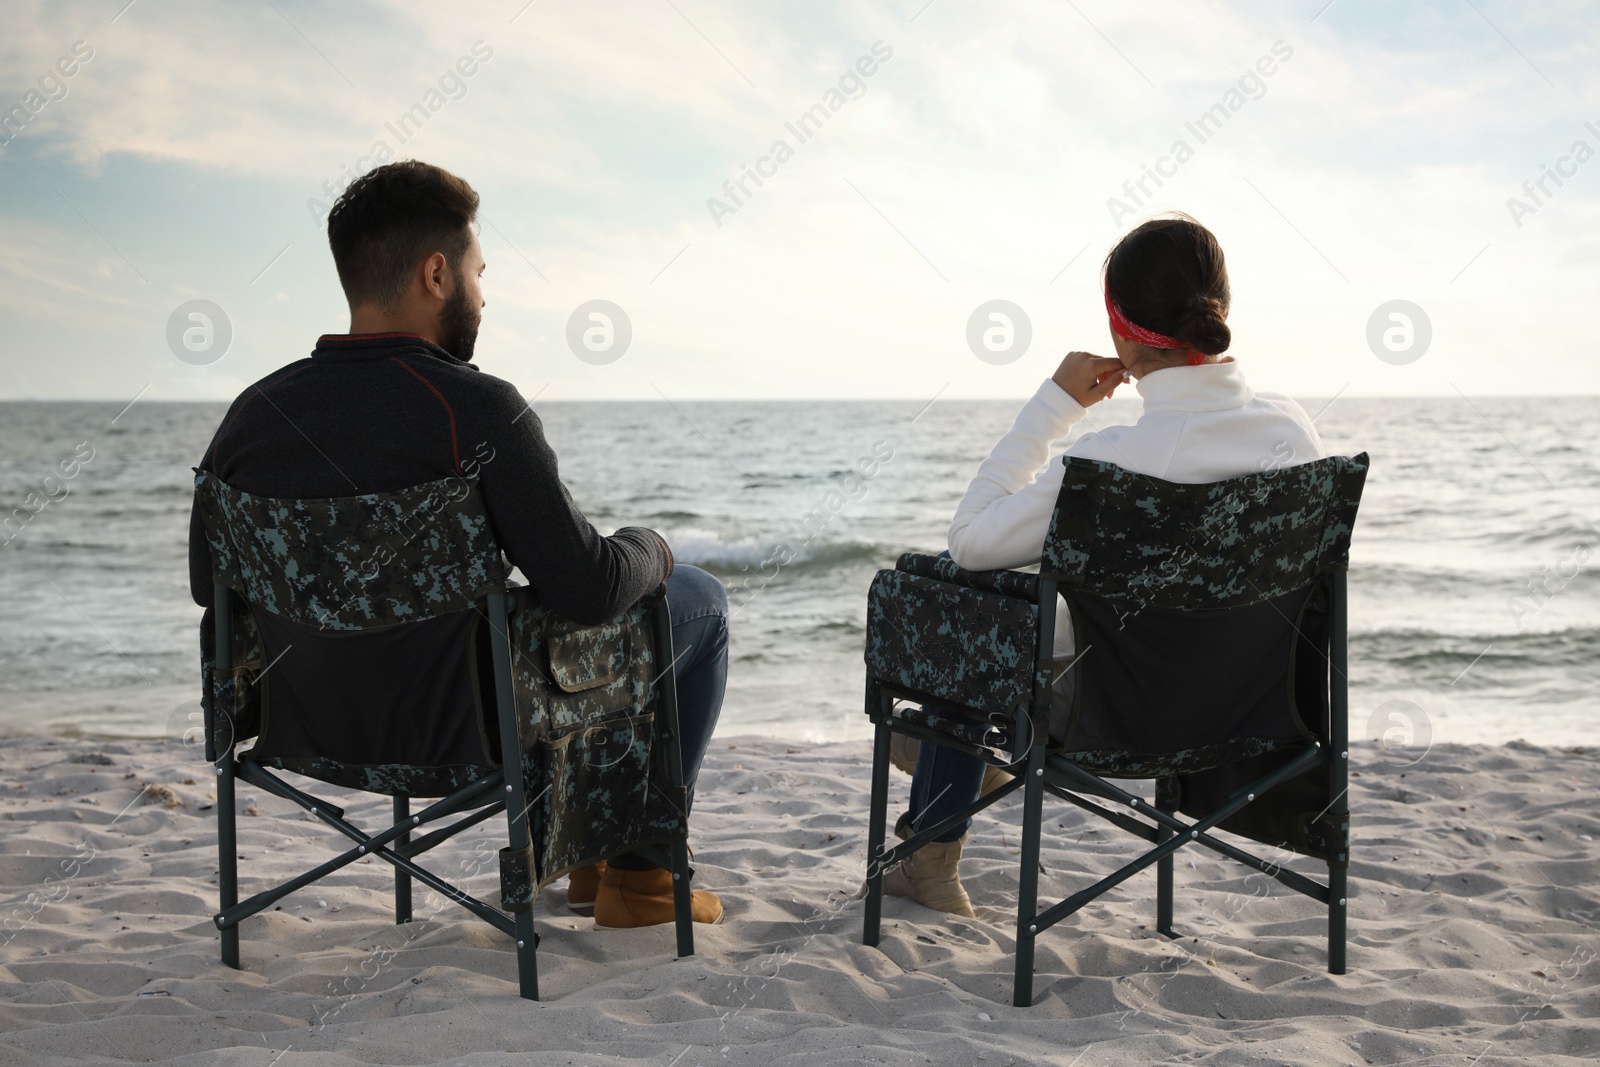 Photo of Couple sitting in camping chairs and enjoying seascape on beach, back view